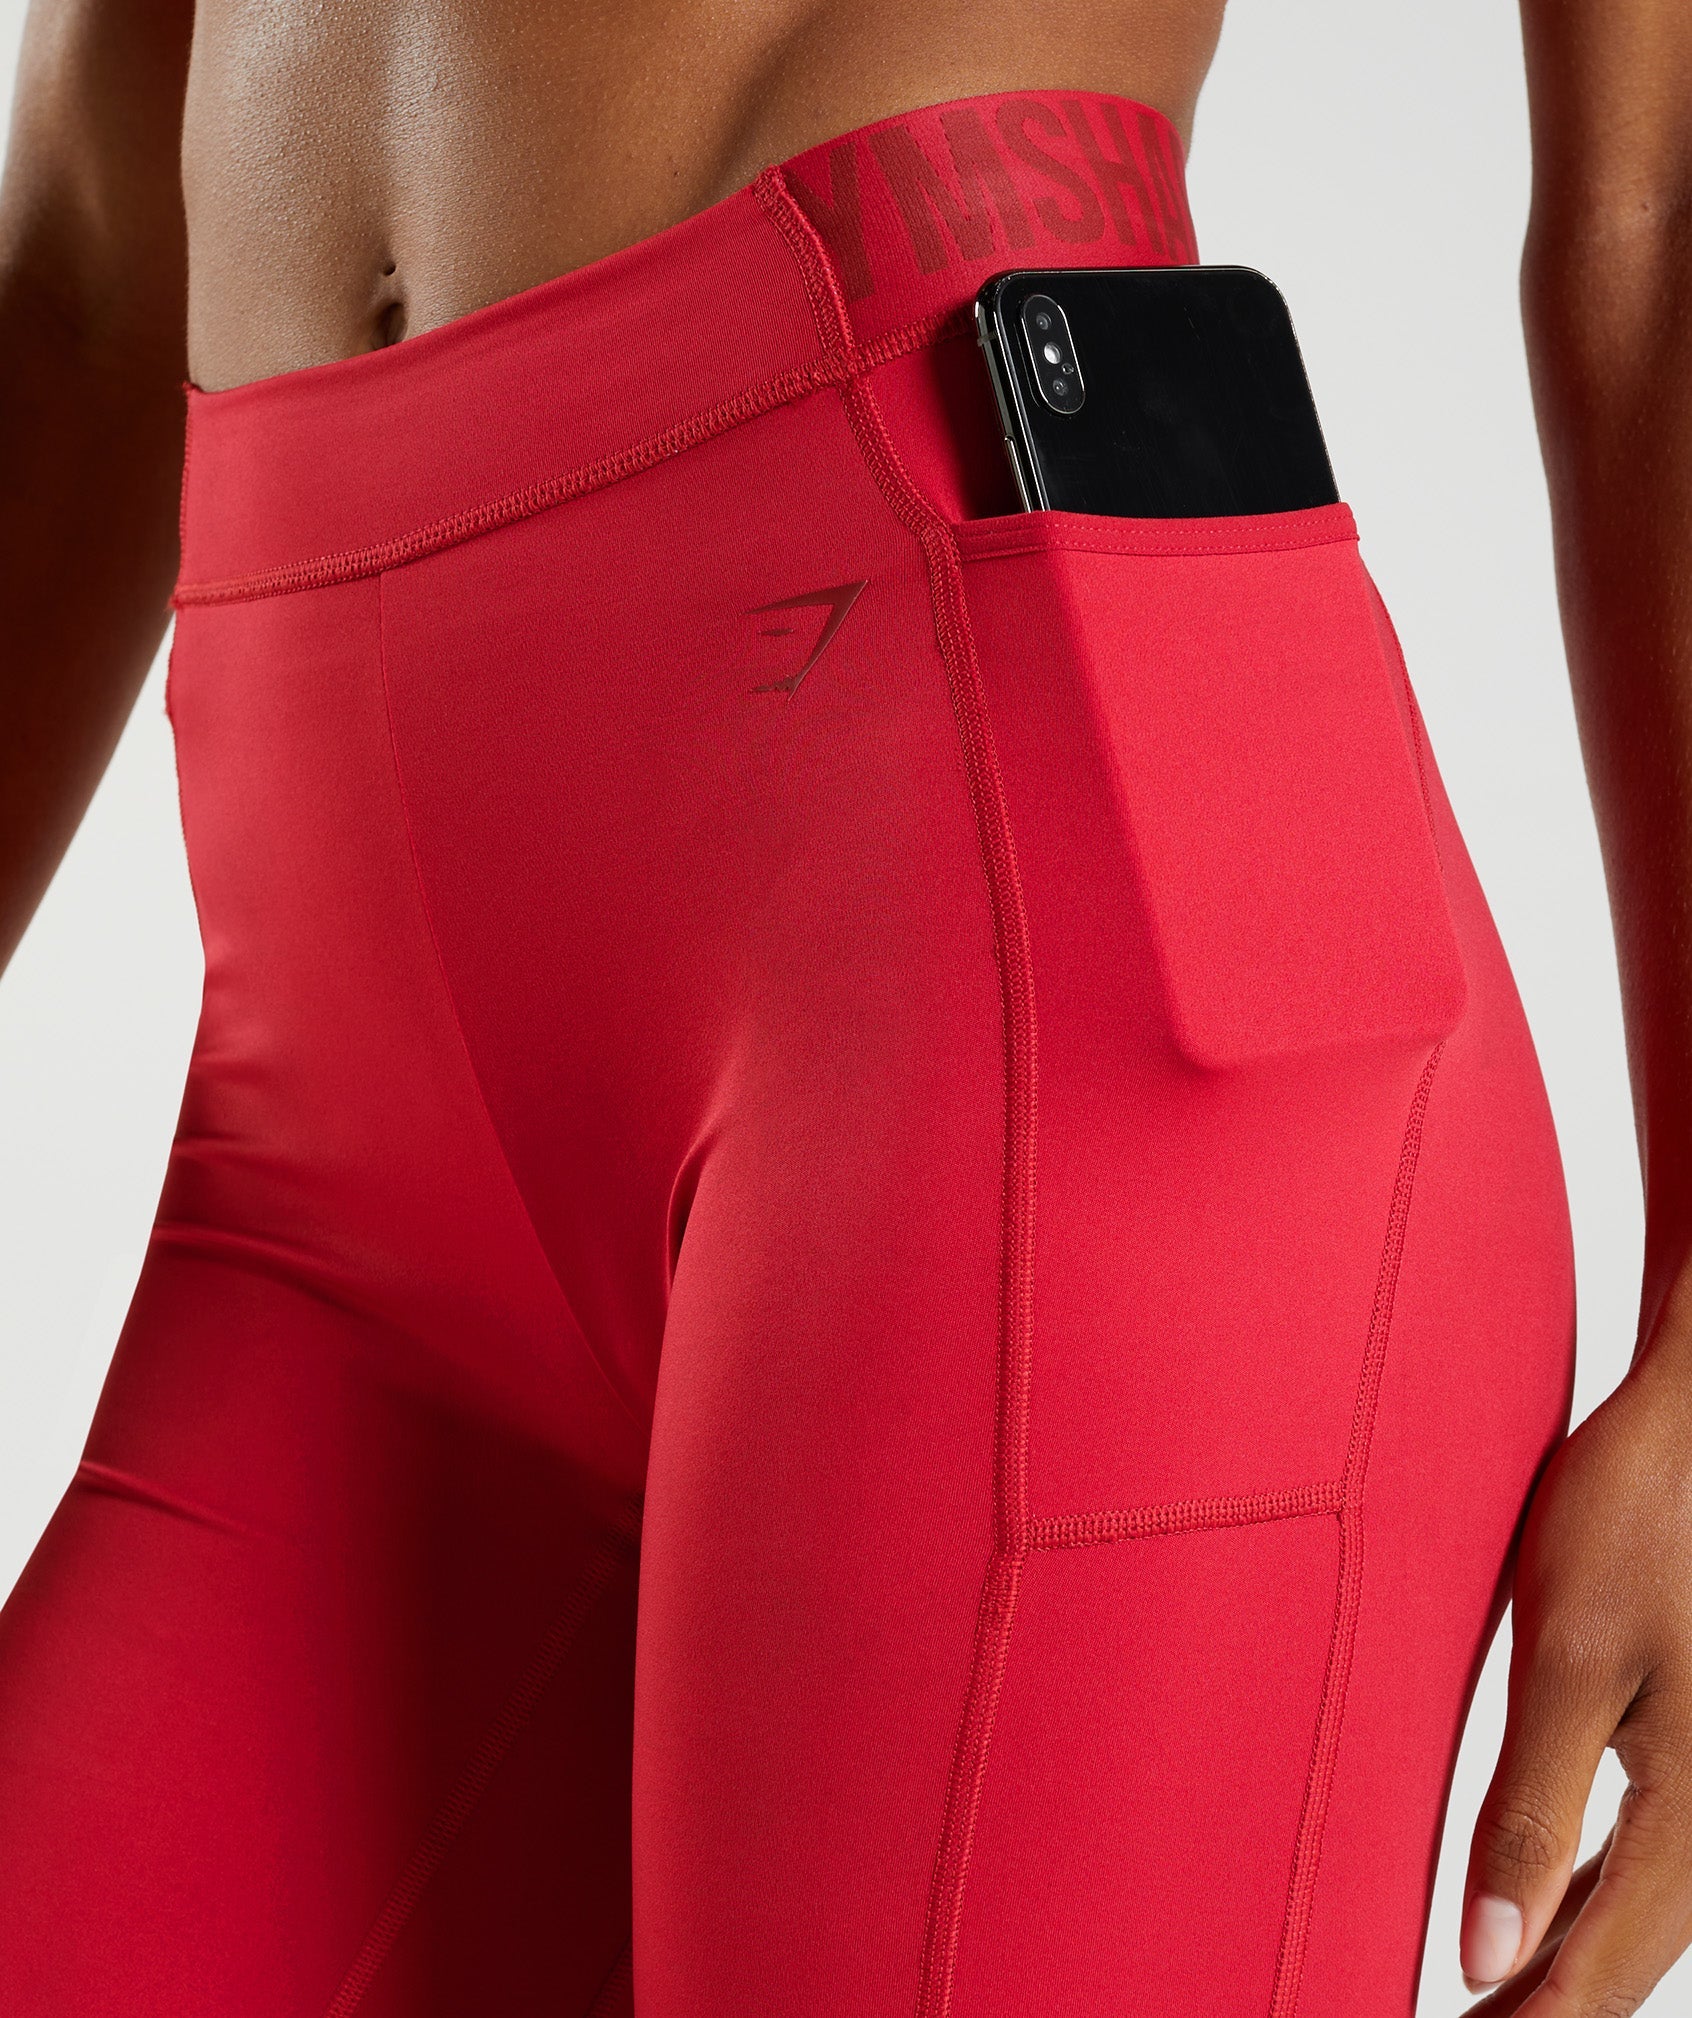 Training Brandmark Cycling Shorts in Salsa Red - view 6